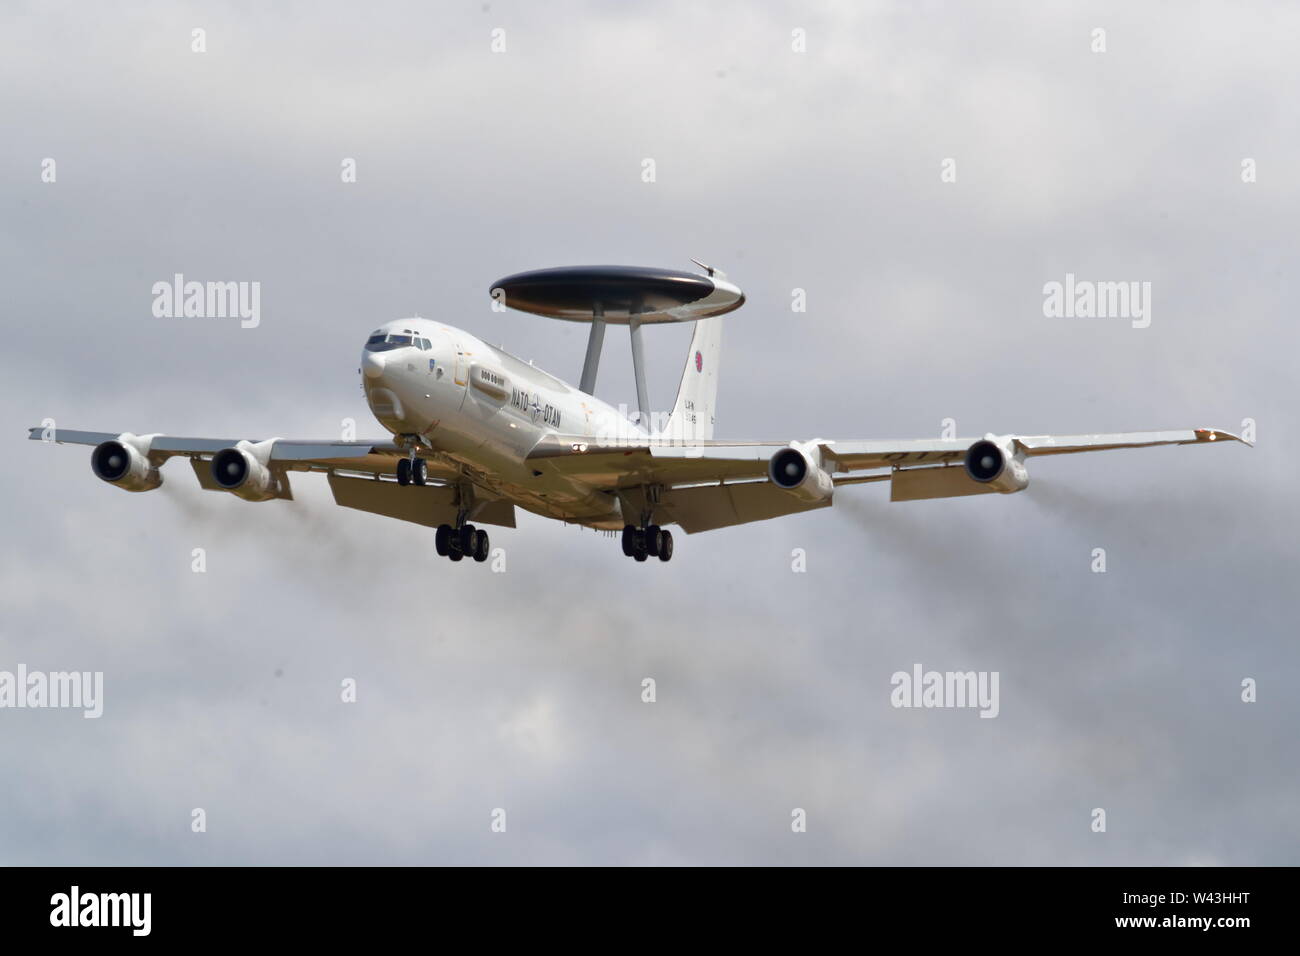 NATO AWACS Boeing E-3A Sentry arriving at the Royal International Air Tattoo RIAT 2019 at RAF Fairford, Gloucestershire, UK Stock Photo